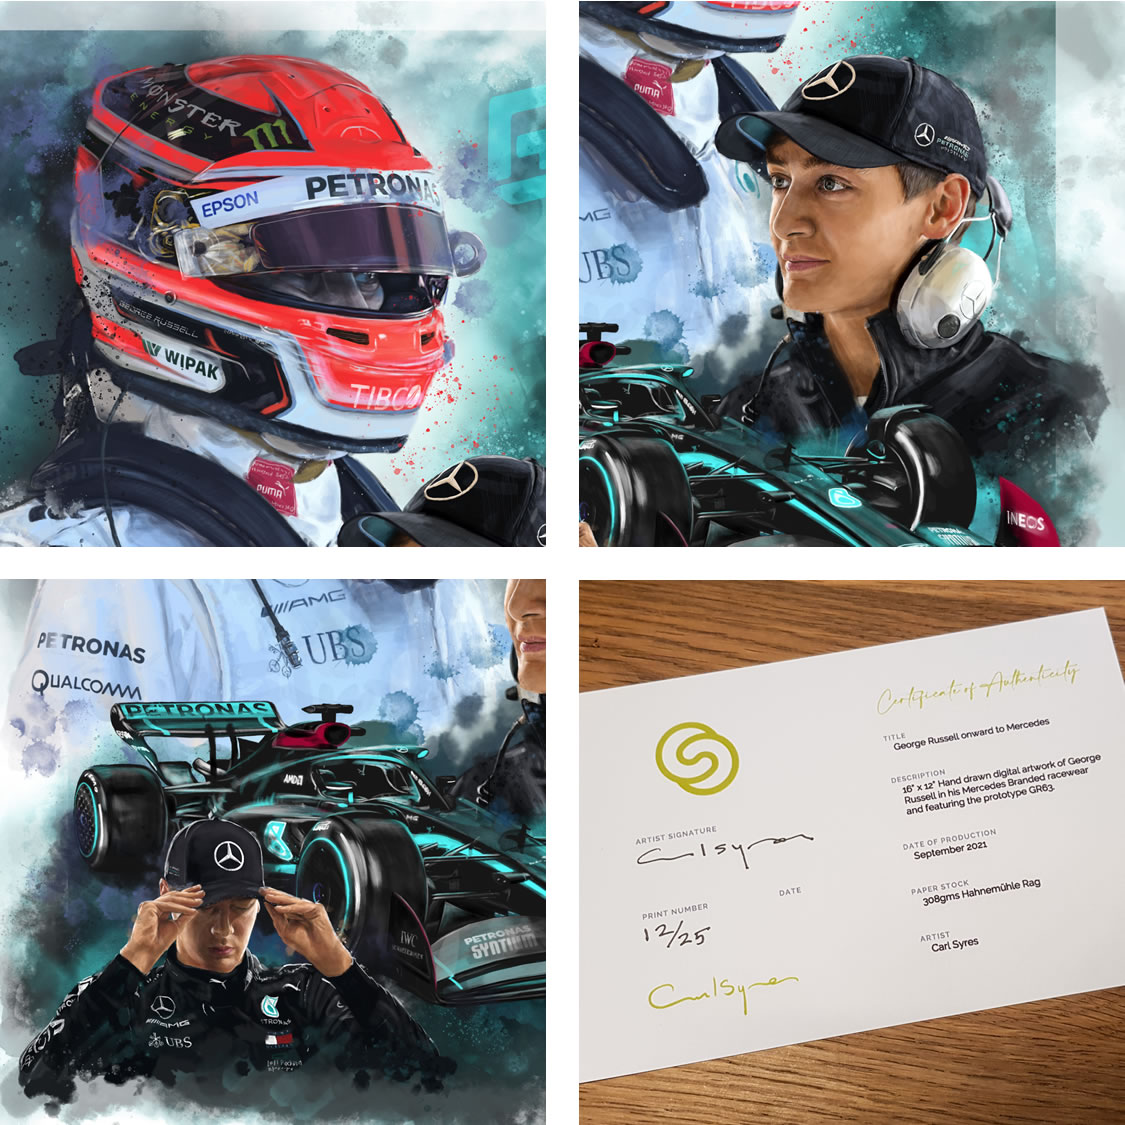 George Russell Mercedes F1 Driver Prints